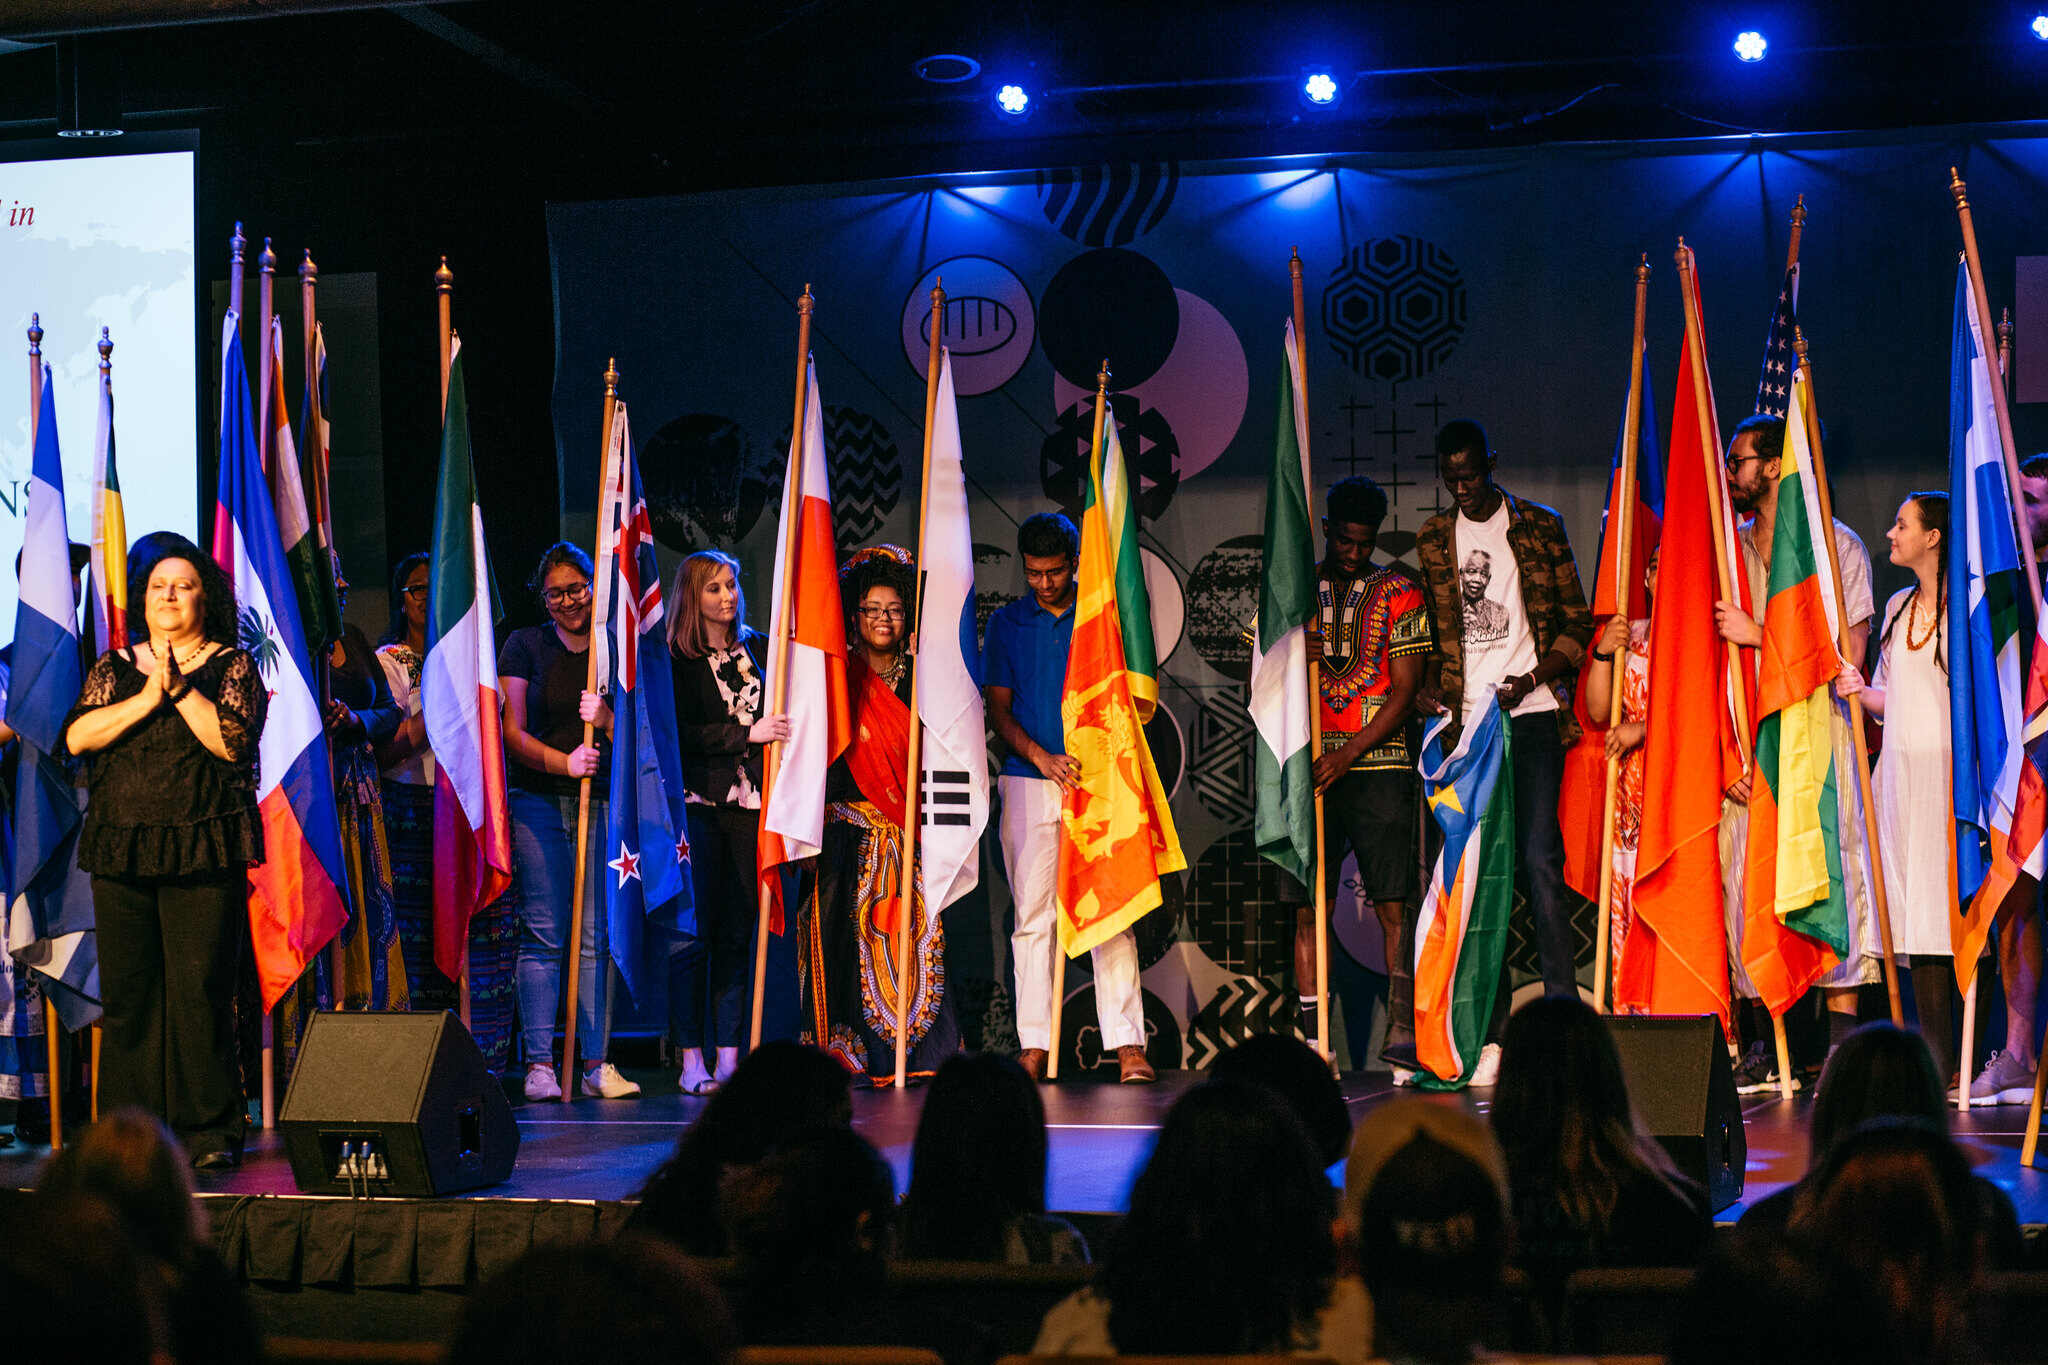 The flags of many different countries displayed at Taste the Nations.